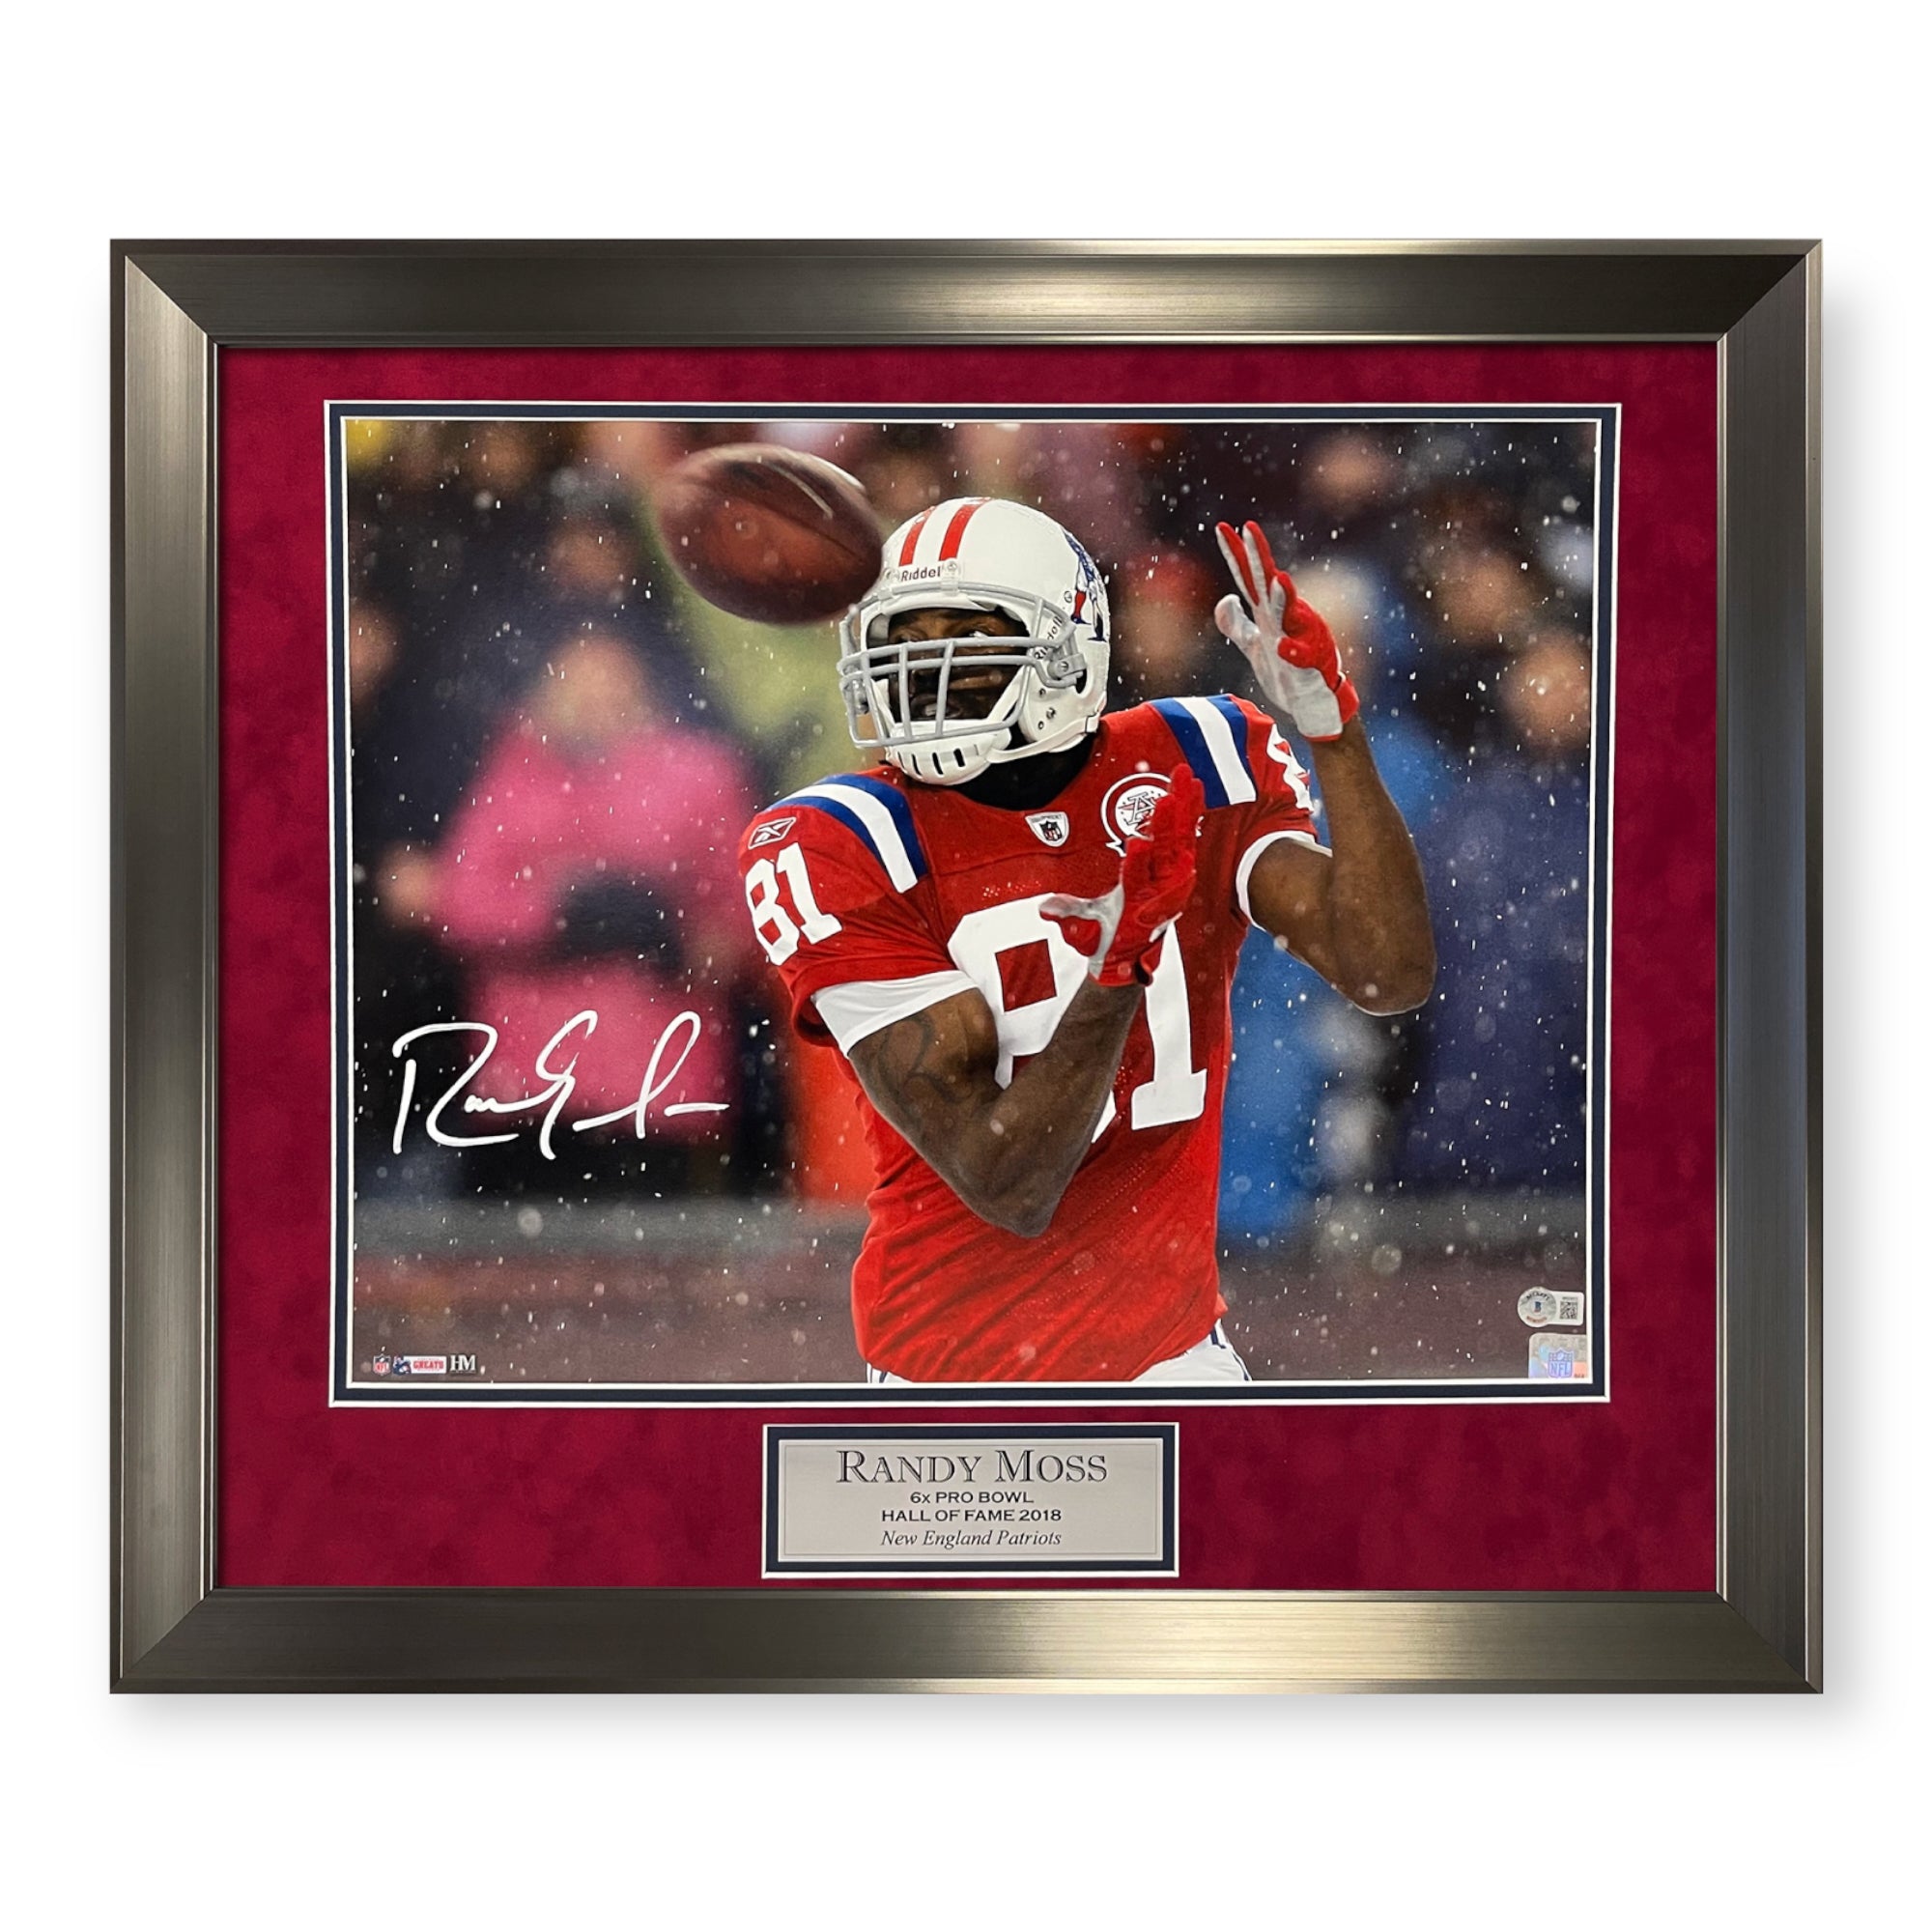 Randy Moss New England Patriots Autographed 16x20 Photo Framed to 23x27 Beckett